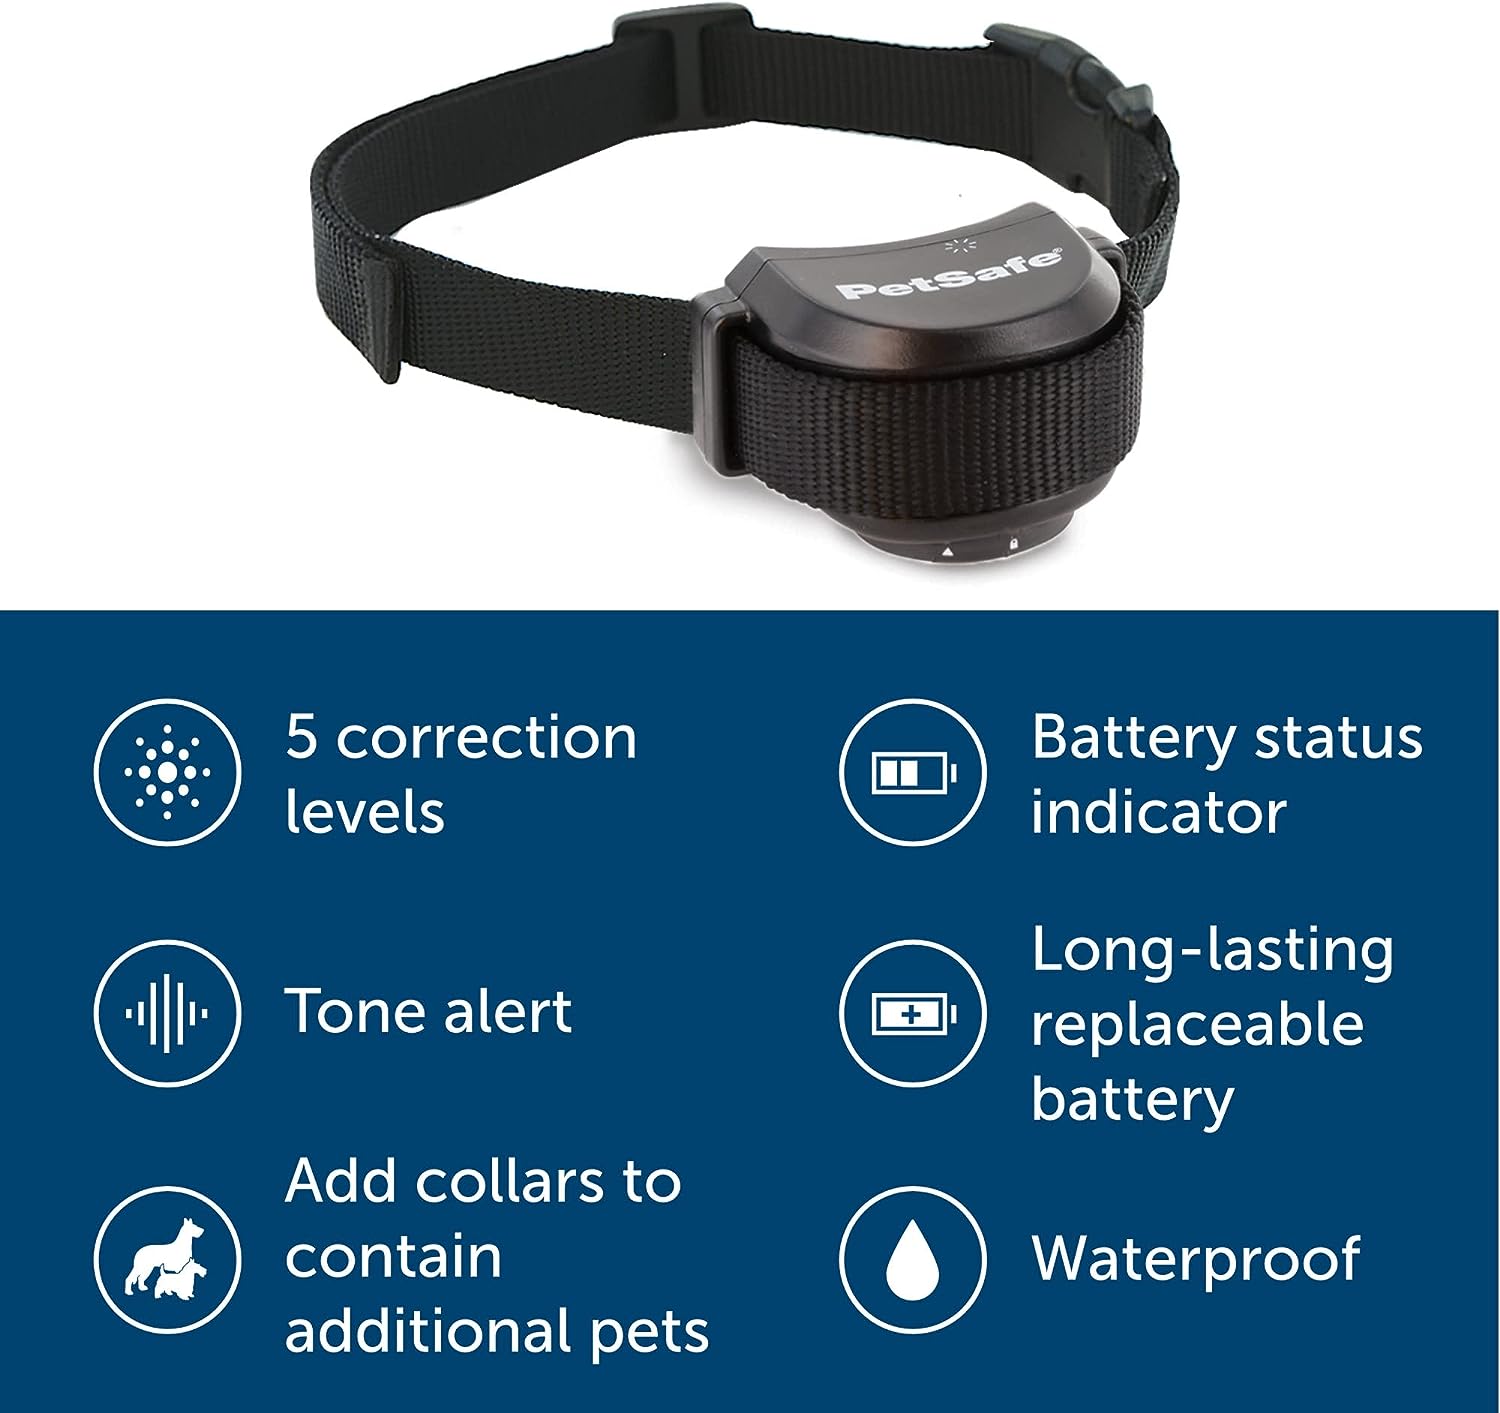 PetSafe Stay  Play Wireless Pet Fence  Replaceable Battery Collar - Circular Boundary Secures up to 3/4 Acre Yard, No-Dig, Americas Safest Wireless Fence From Parent Company INVISIBLE FENCE Brand